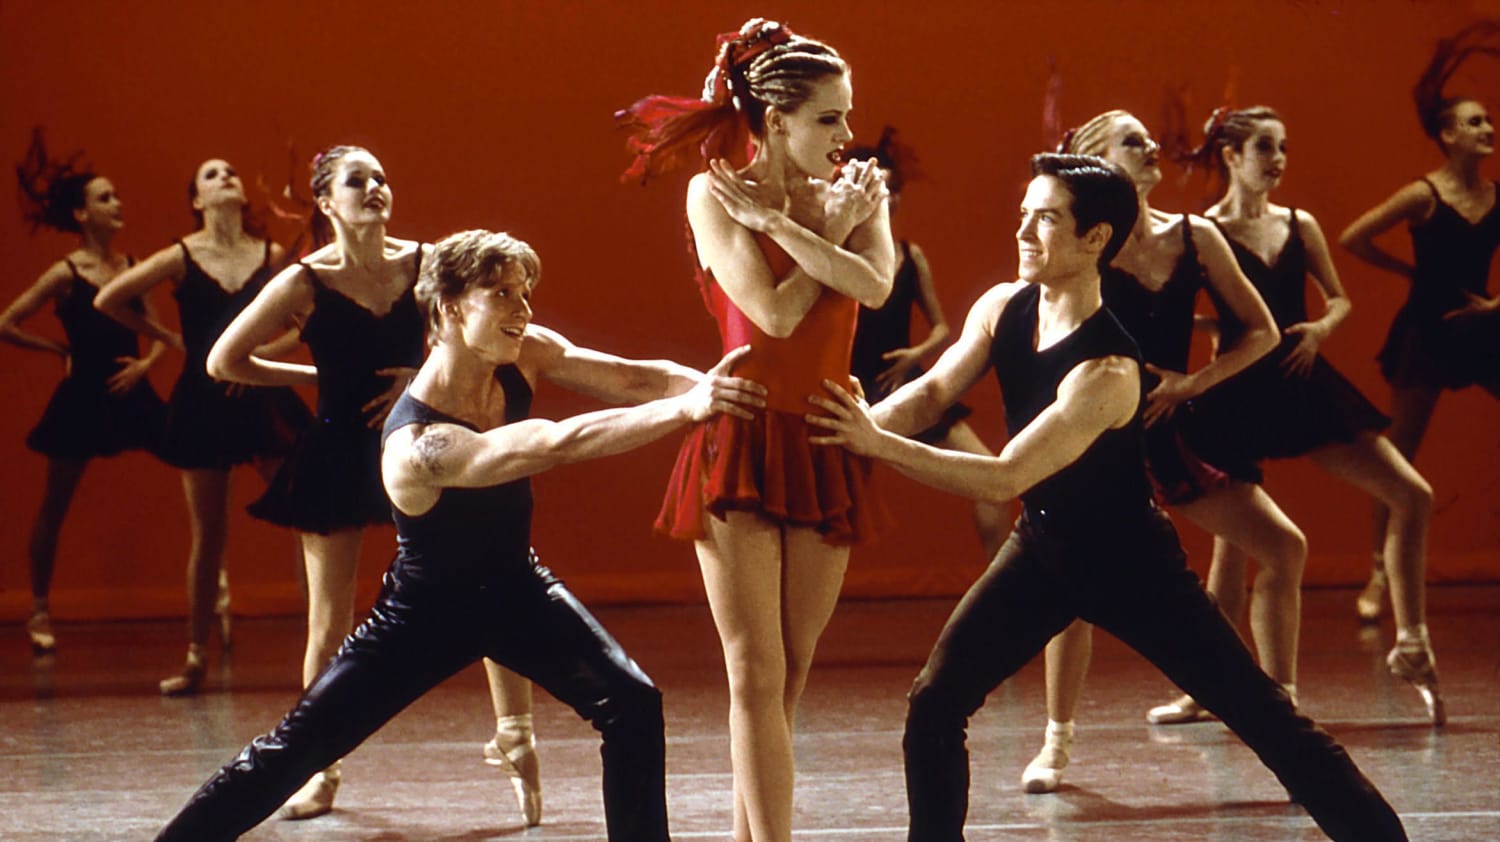 20 Showstopping Facts About Center Stage for Its 20th Anniversary